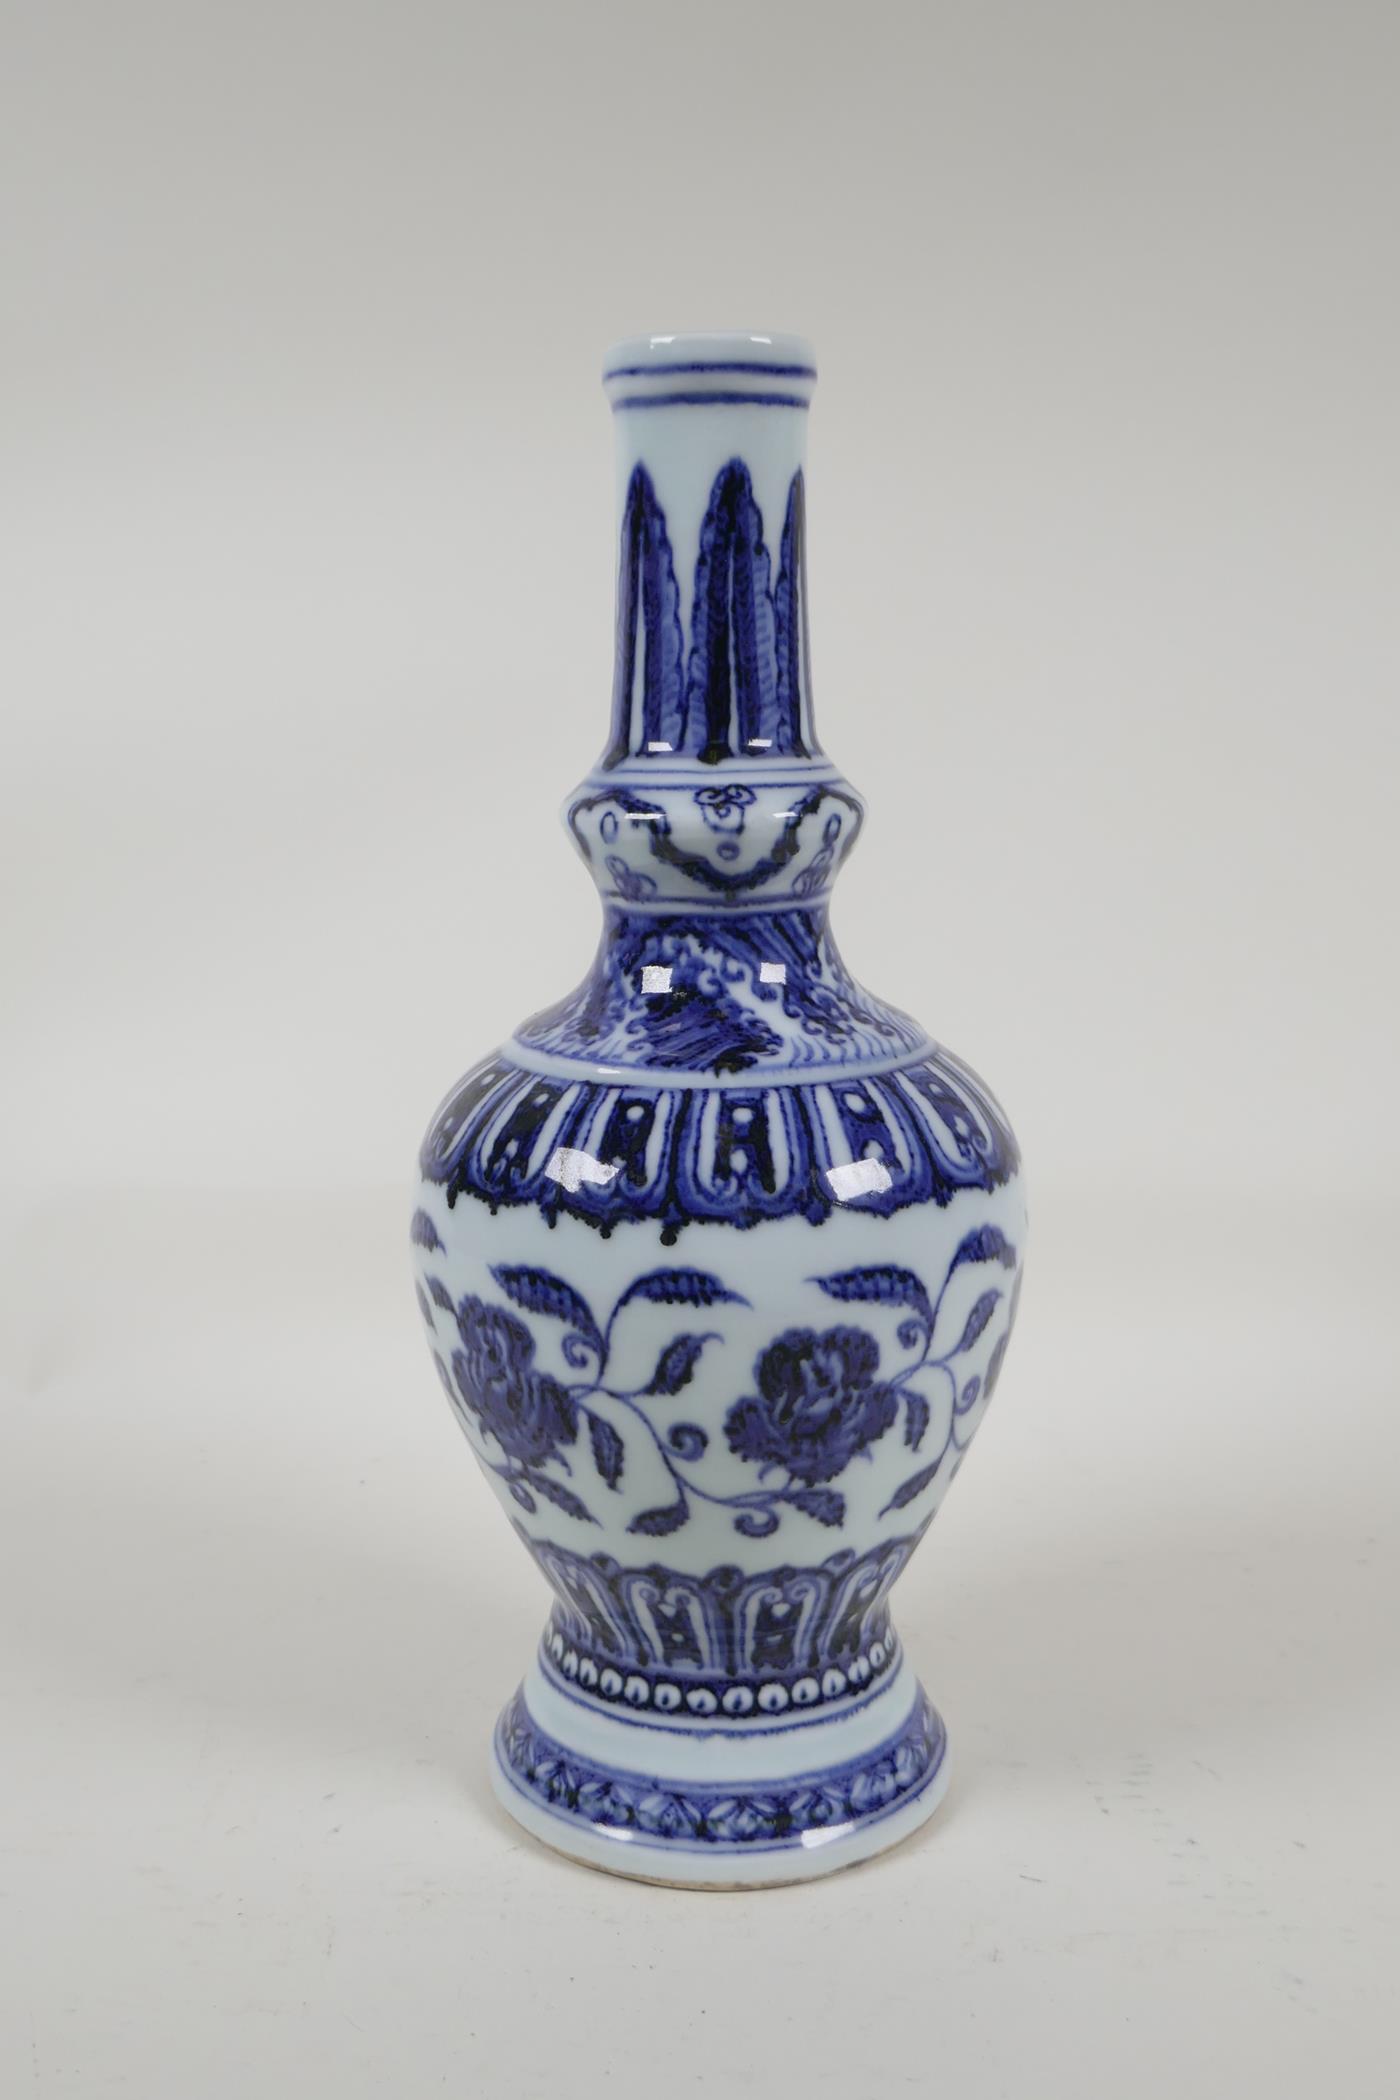 A Chinese blue and white porcelain vase with scrolling floral decoration, 6 character mark to - Image 2 of 4